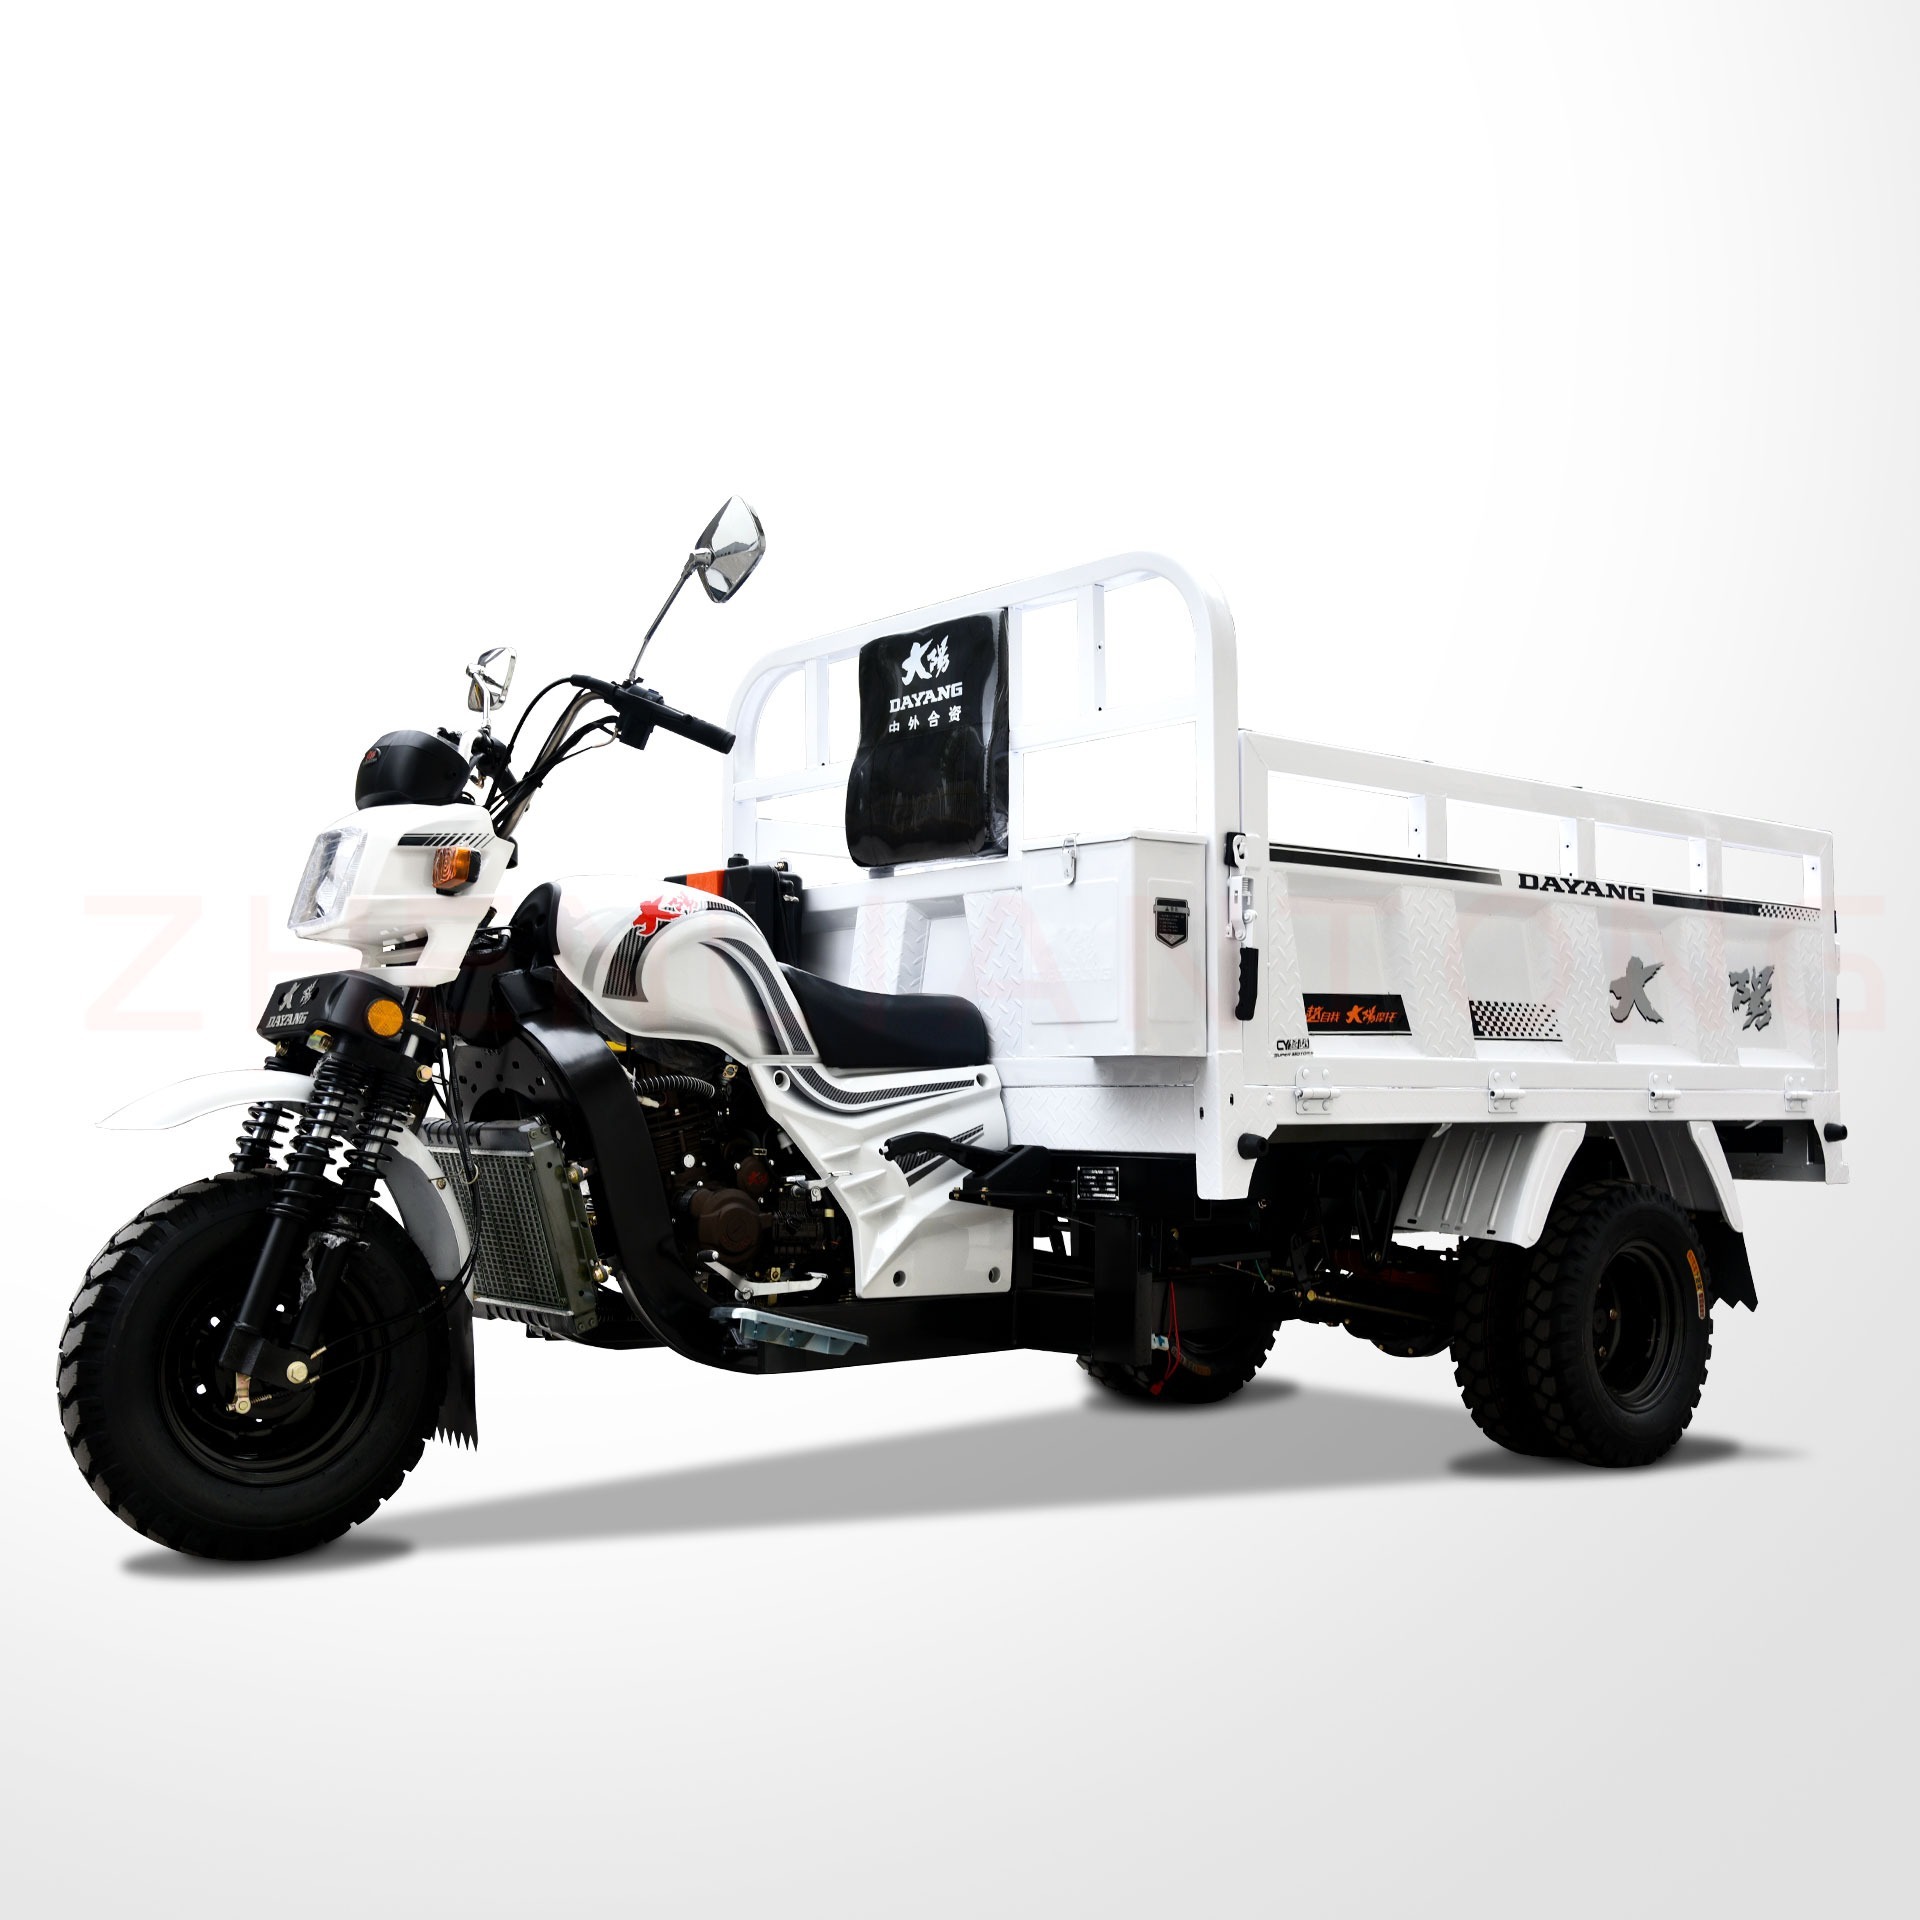 DAYANG Cargo Motorized Tricycle With DAYANG Engine tricycle van cargo 200cc Water Cooling Customized  for global